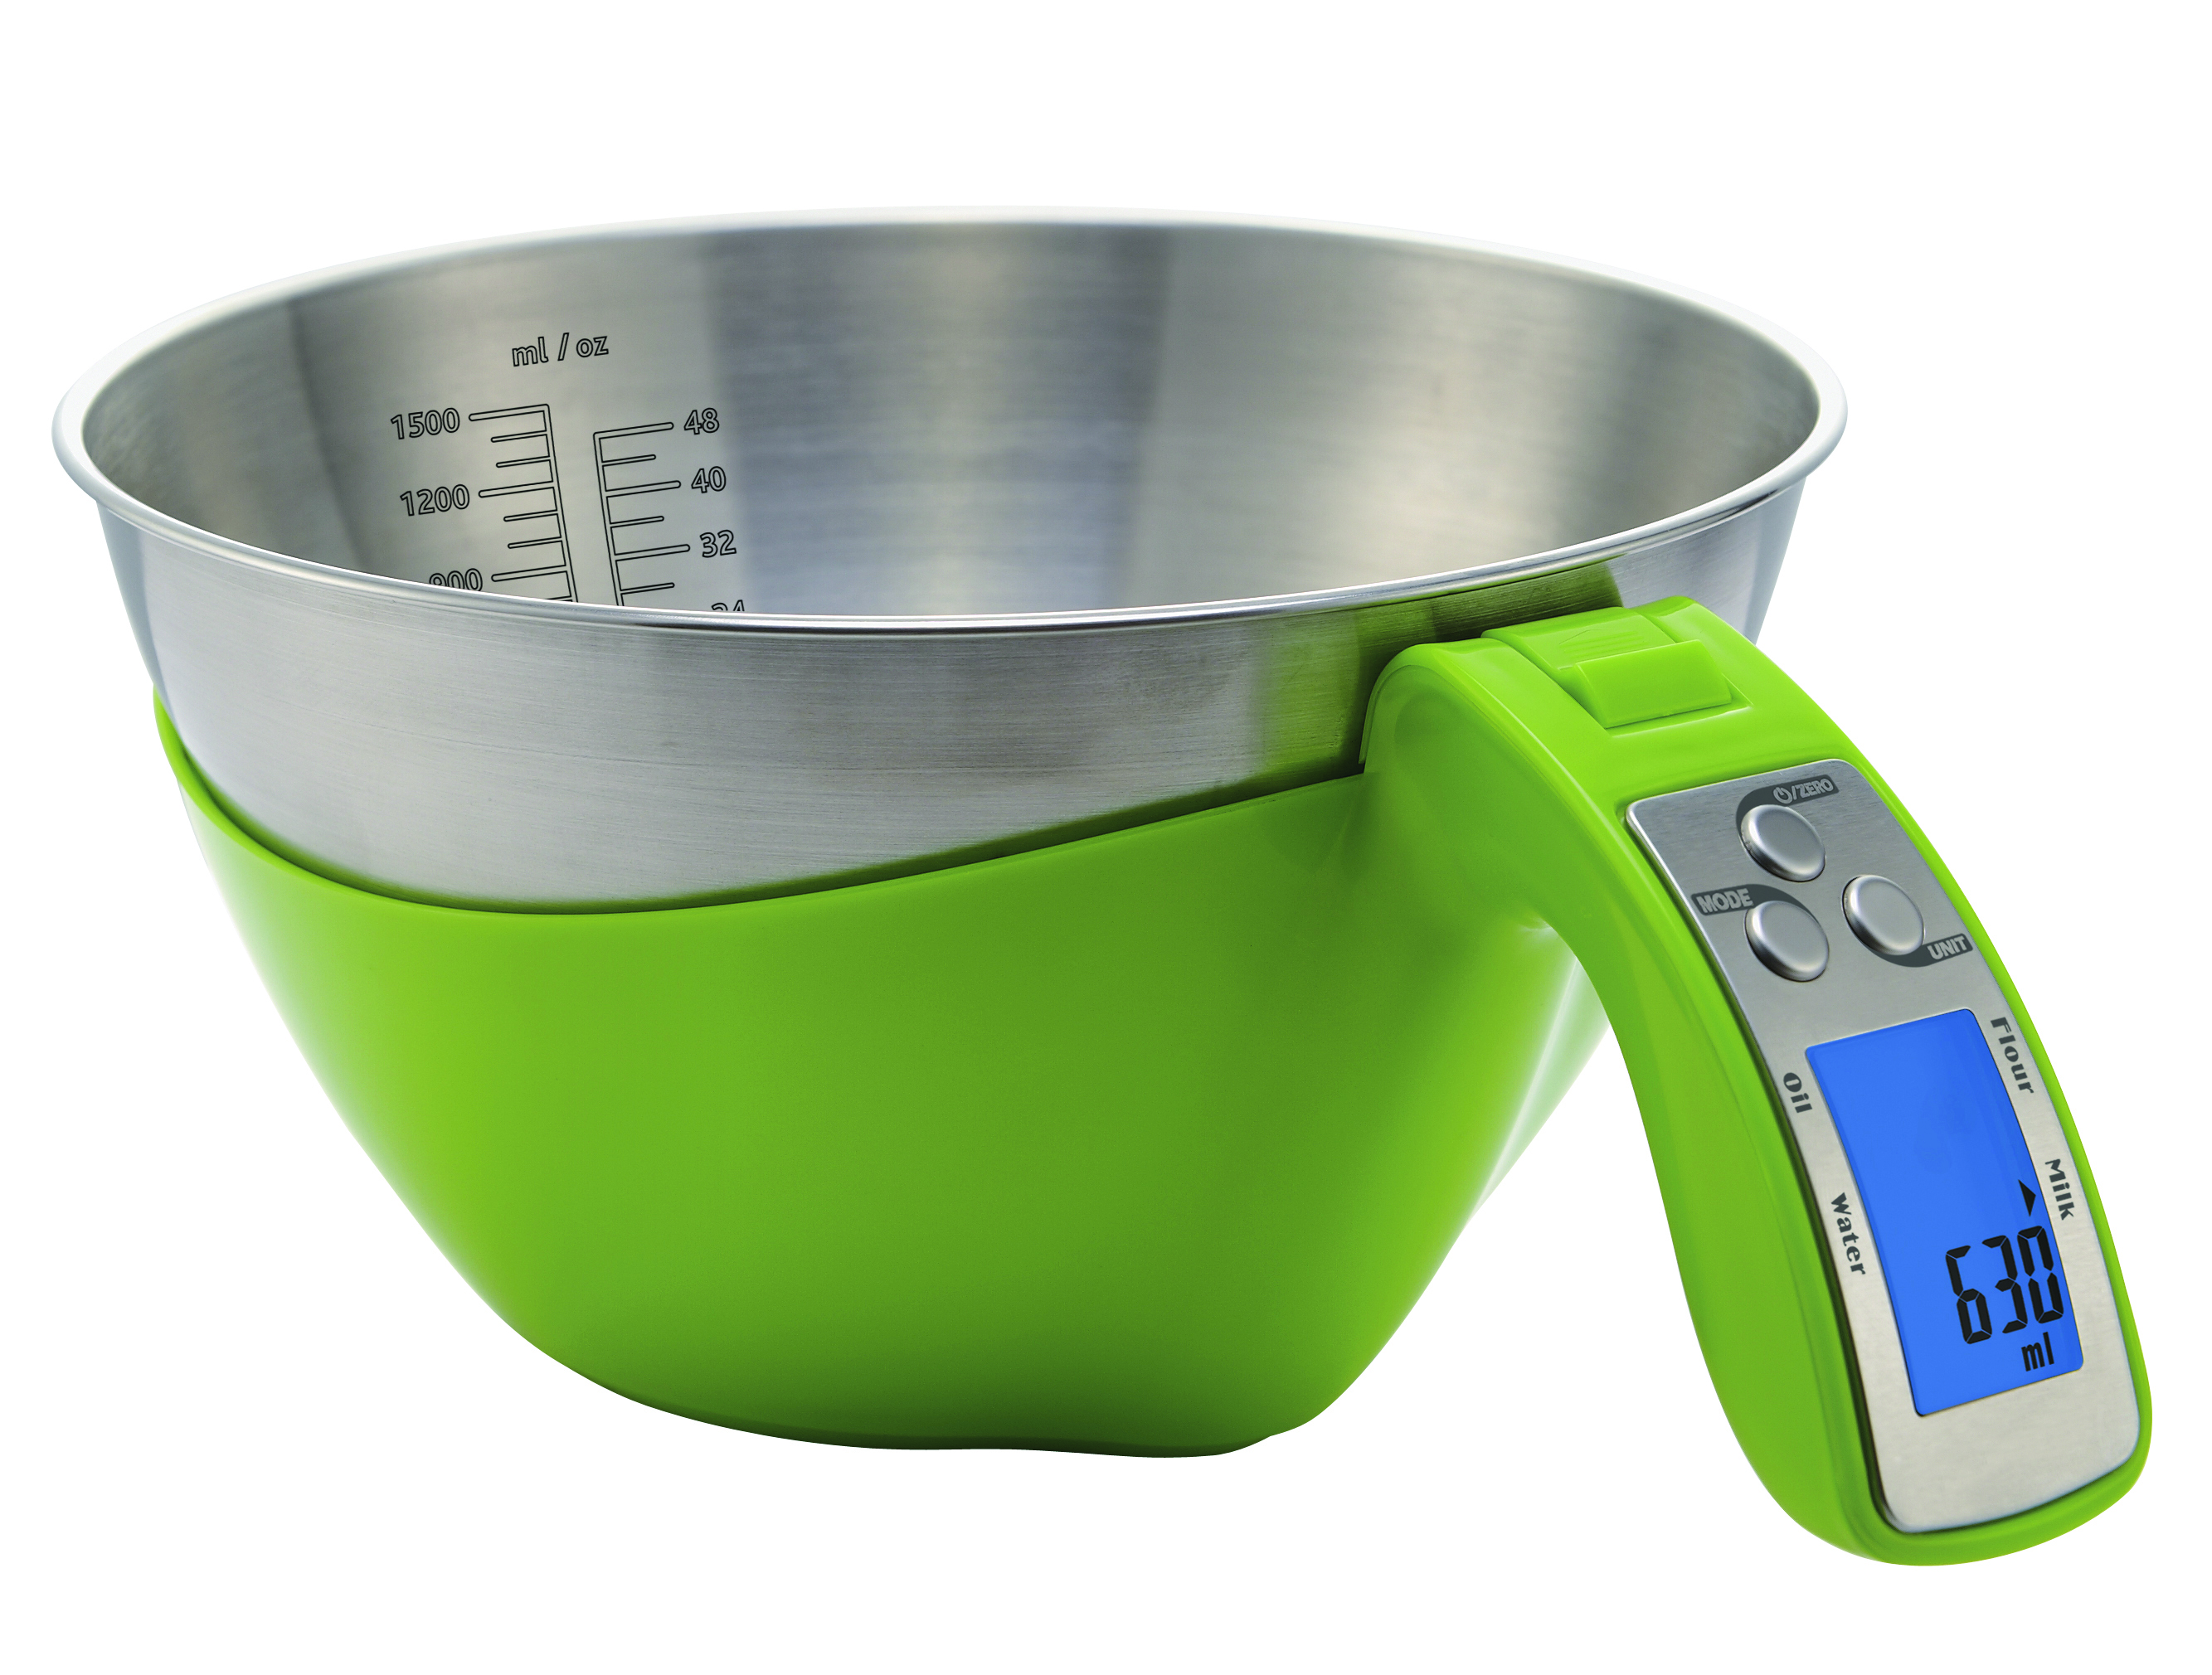 Measuring cup scale